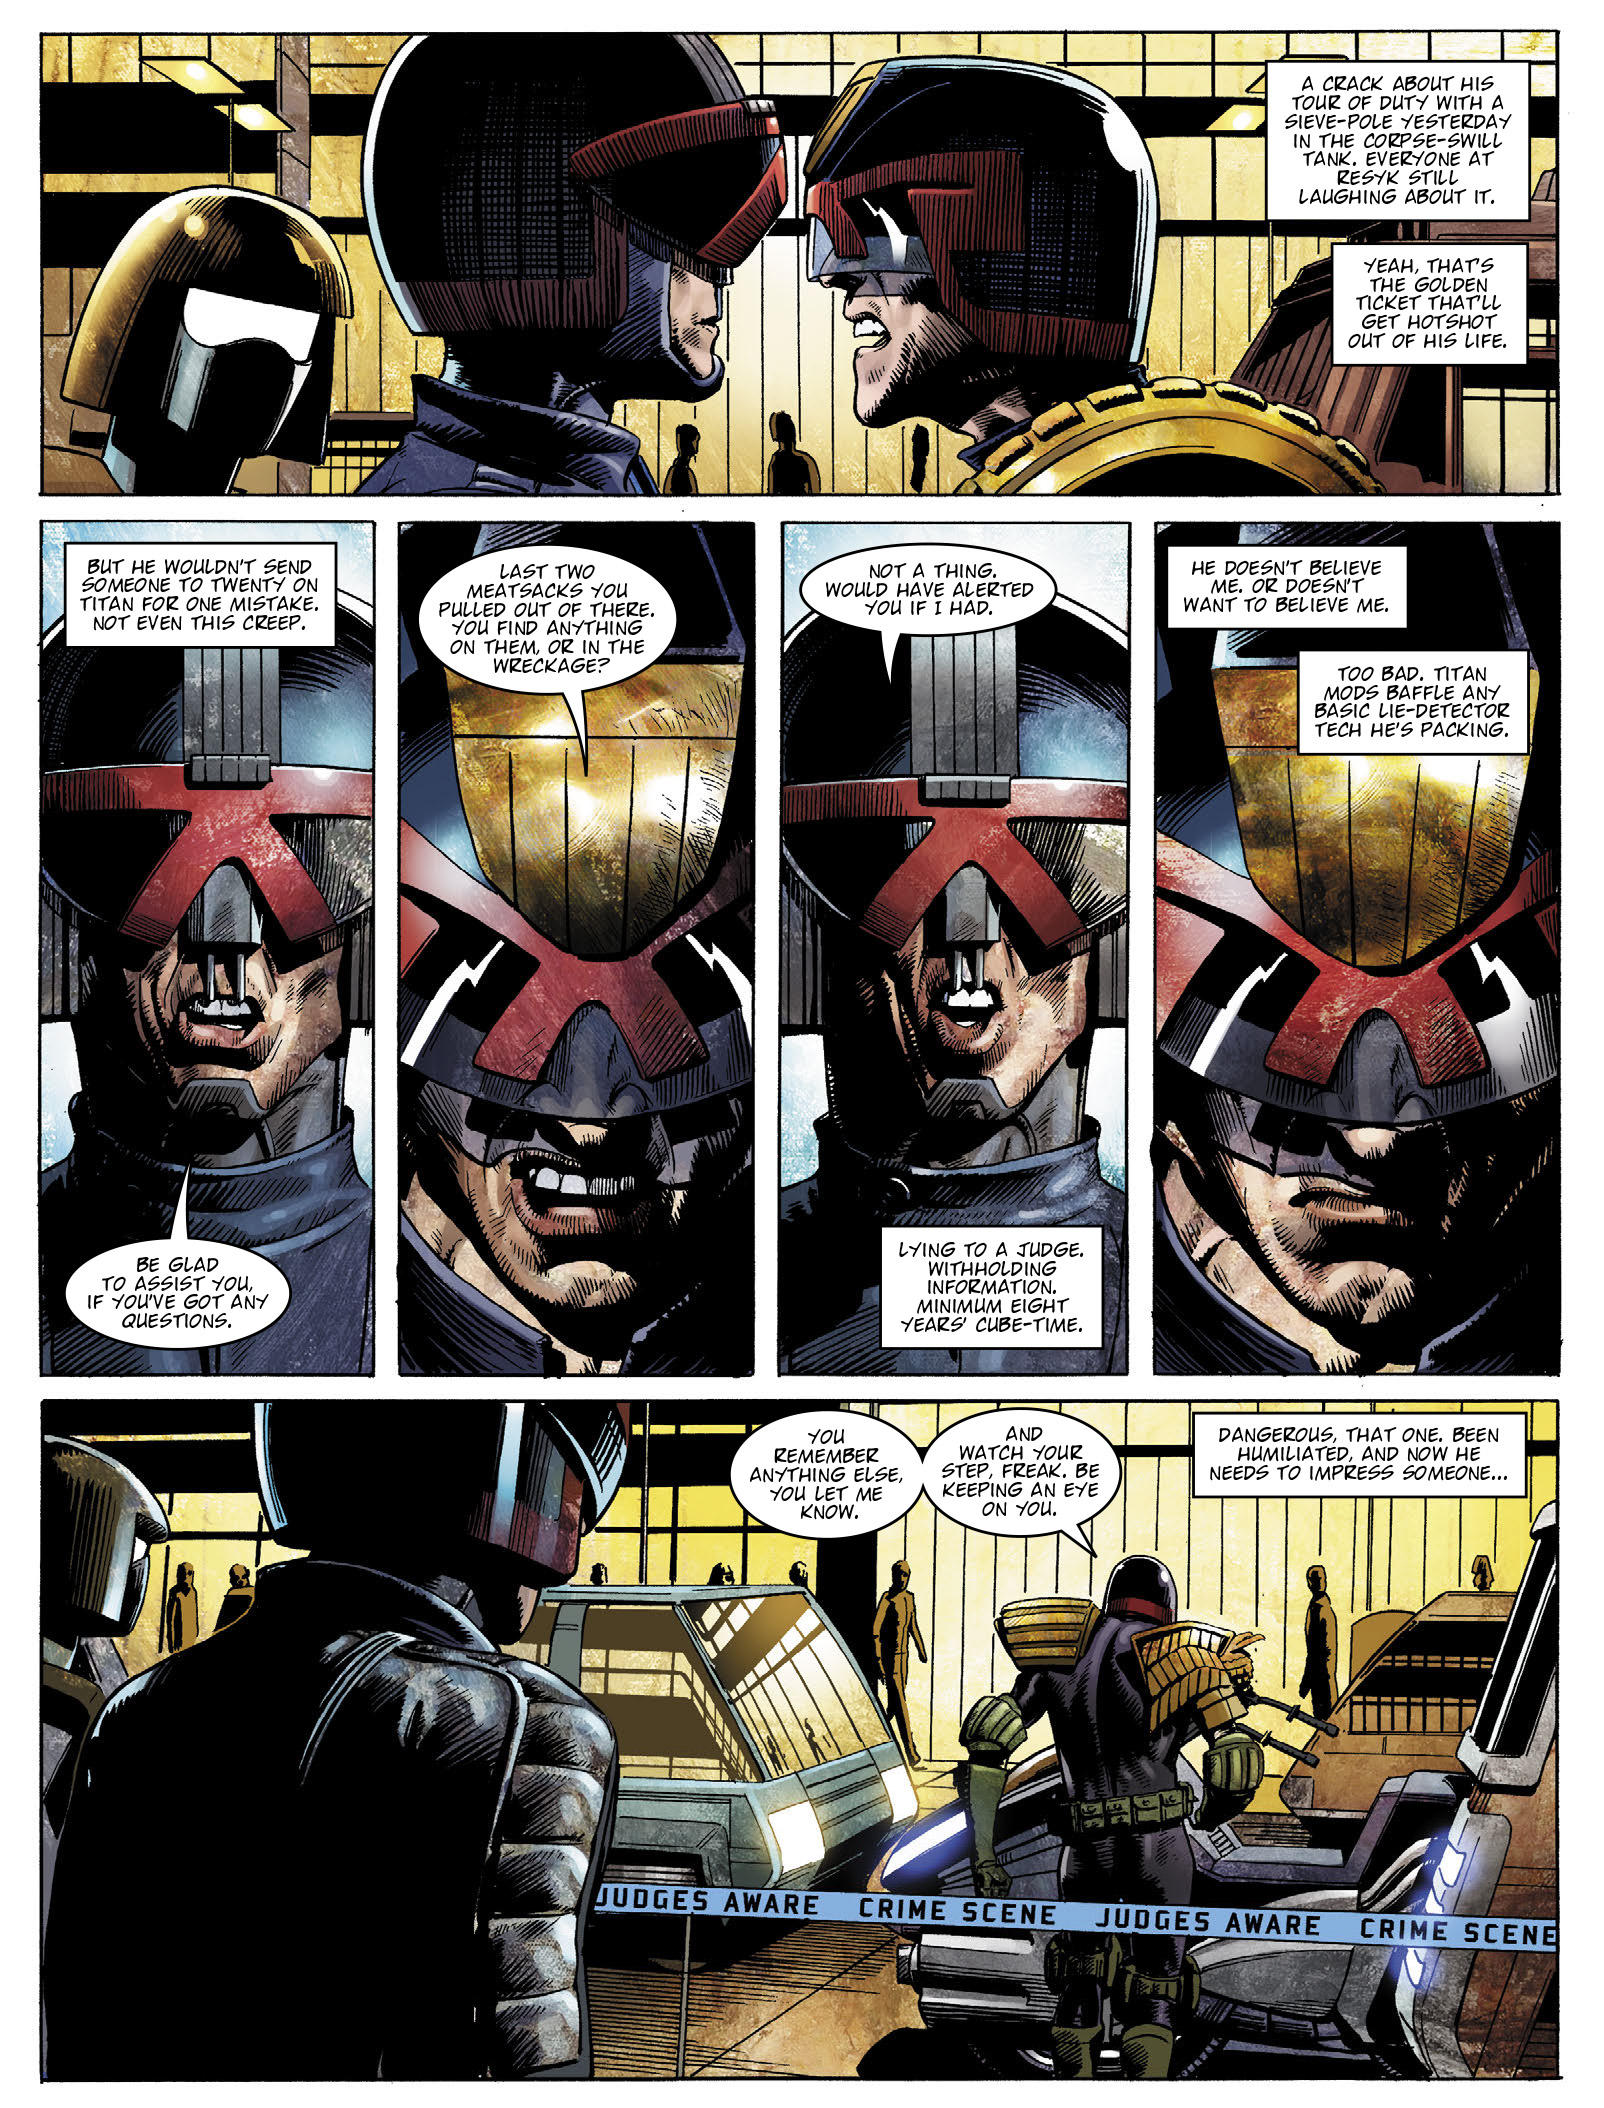 2000 AD: Chapter 2283 - Page 4